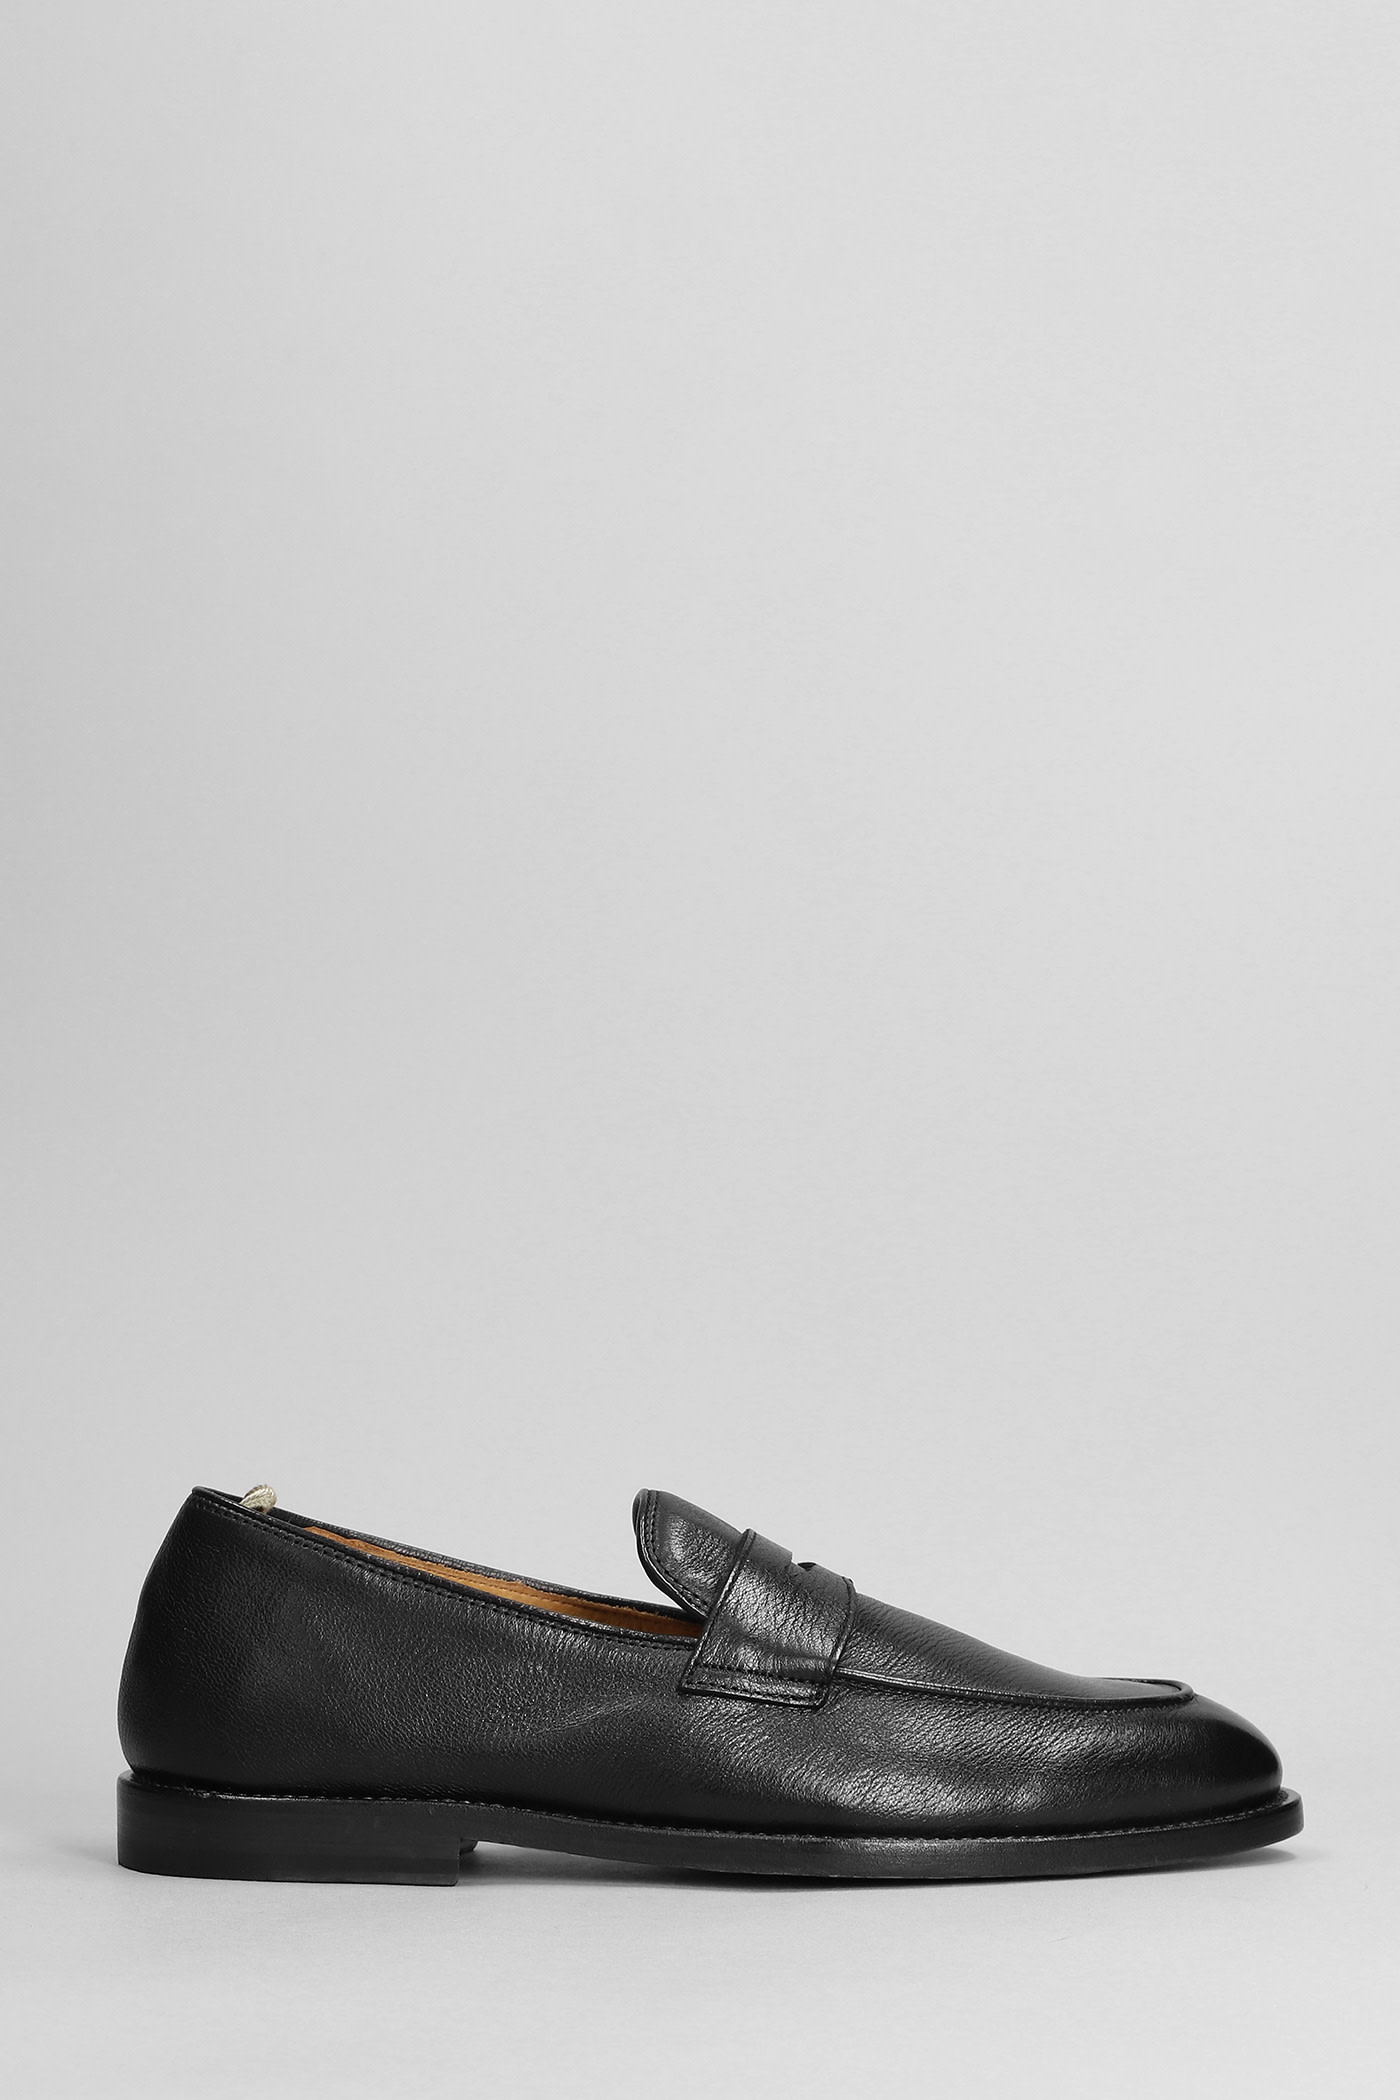 OFFICINE CREATIVE OPERA LOAFERS IN BLACK LEATHER